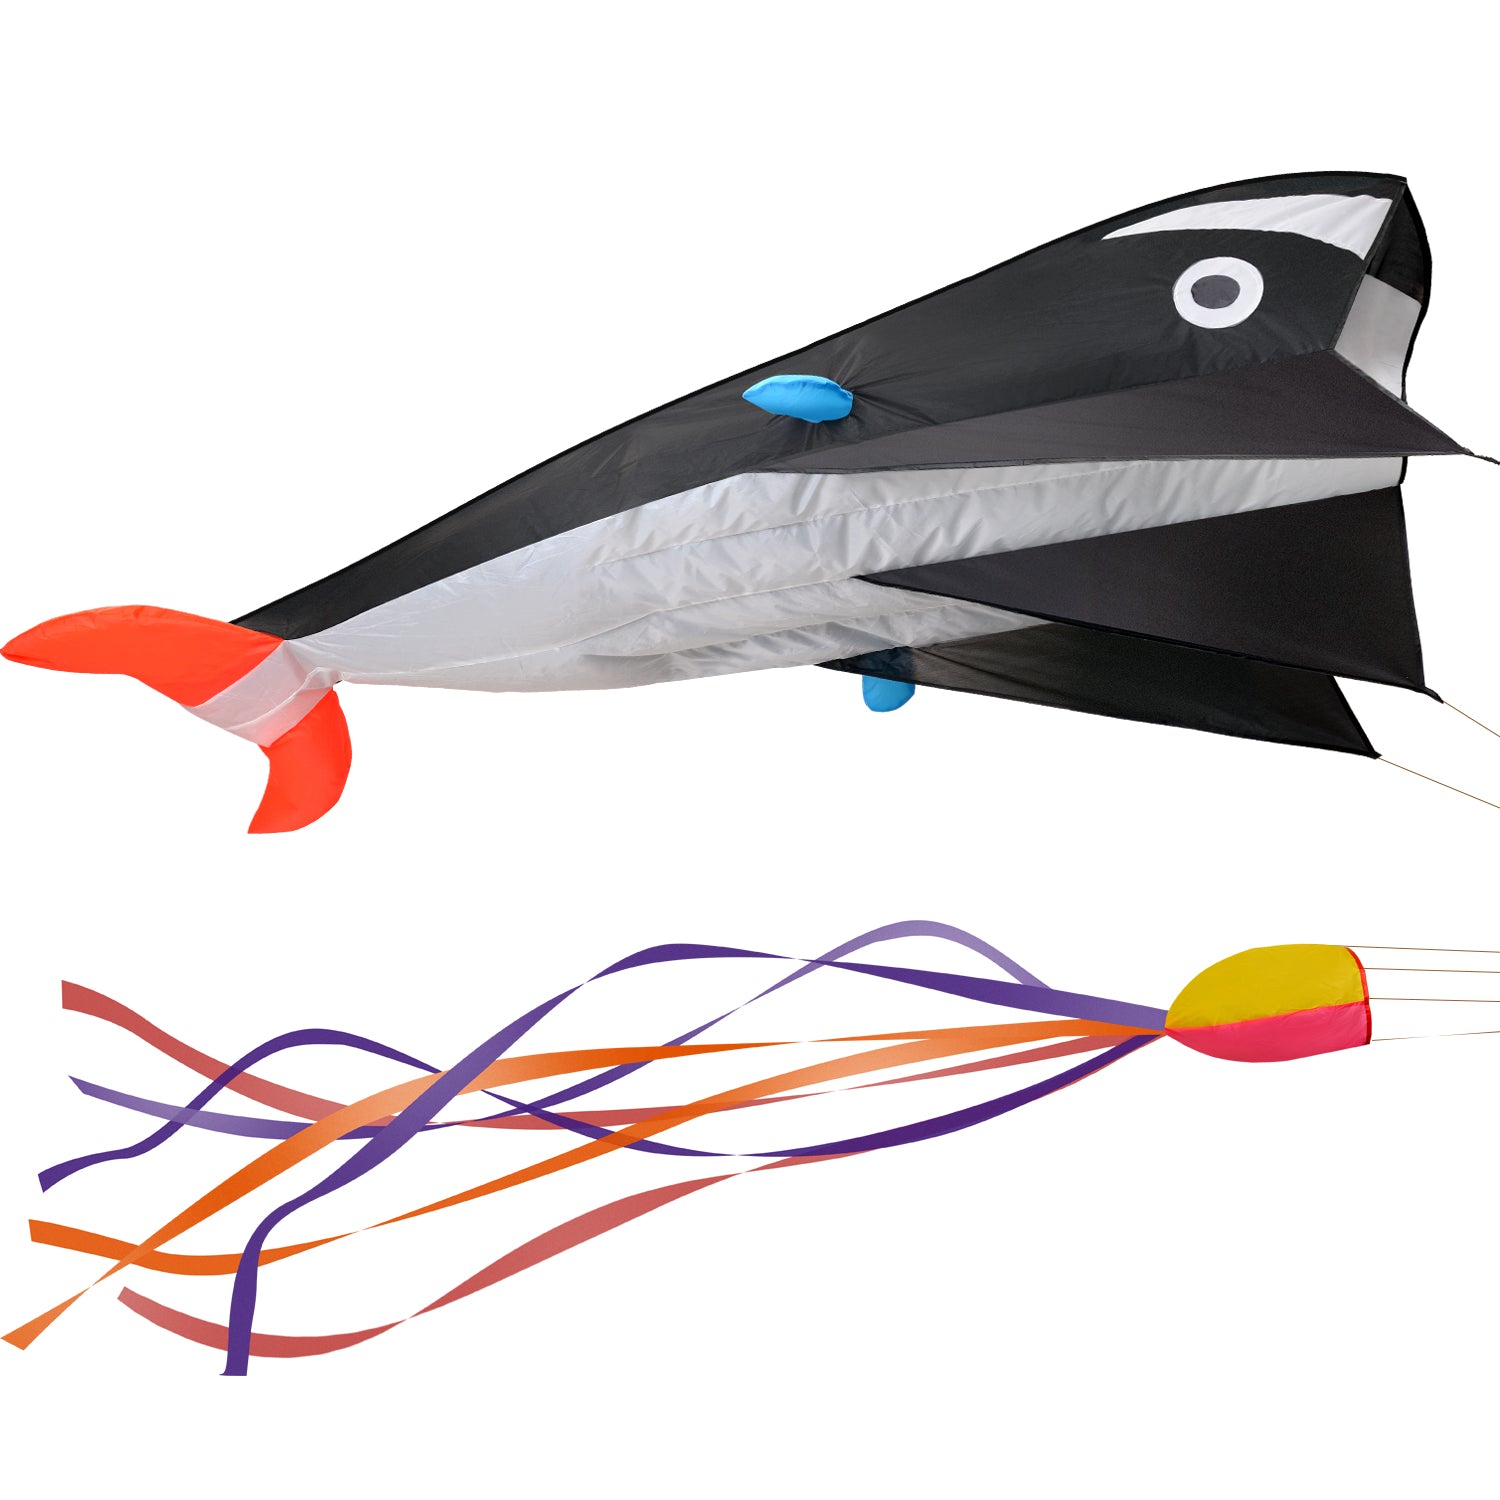  Flying War Whale Giant 3D Frameless Parafoil Kite Outdoor Beach  Park Garden Fun - Ready to Fly with Lines : Toys & Games